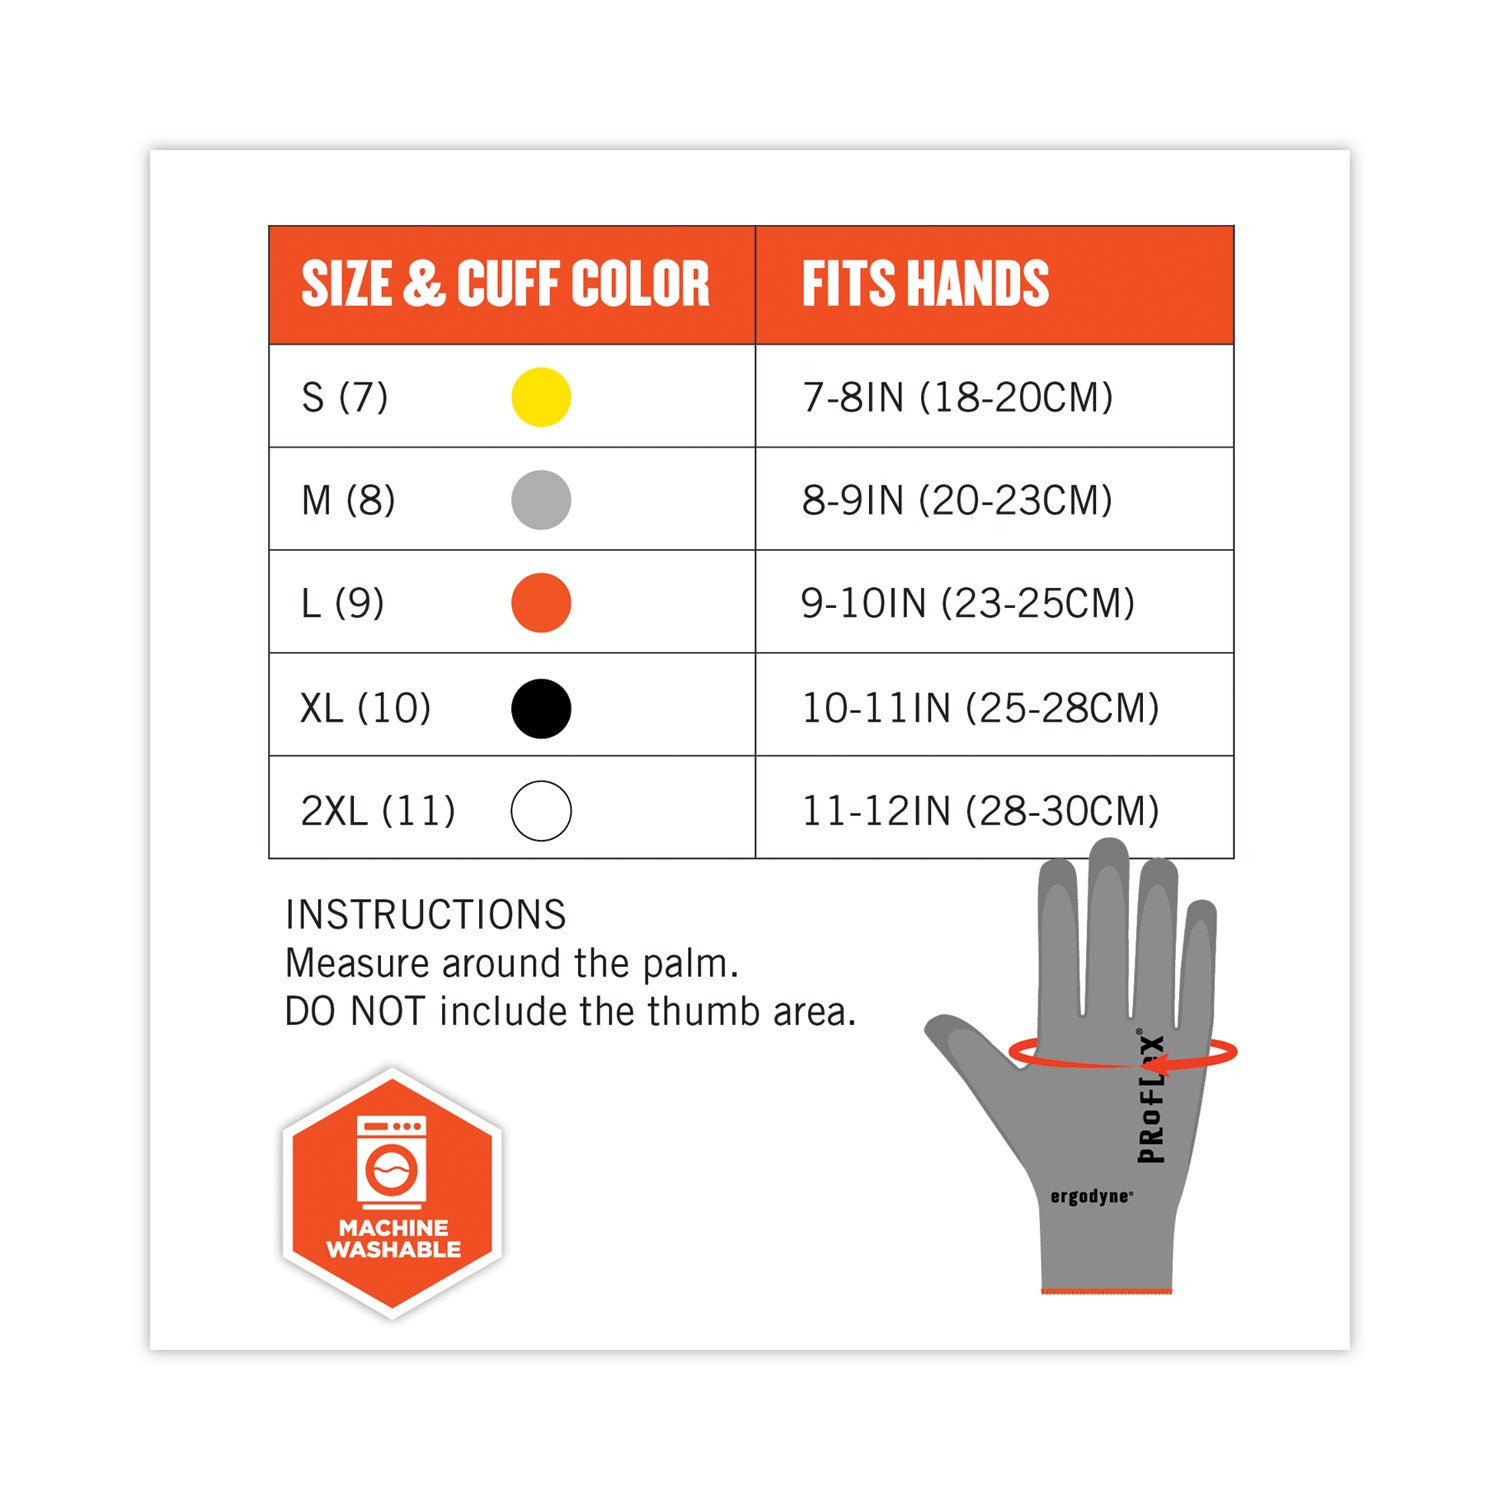 proflex-7024-ansi-a2-pu-coated-cr-gloves-gray-small-pair-ships-in-1-3-business-days_ego10402 - 5